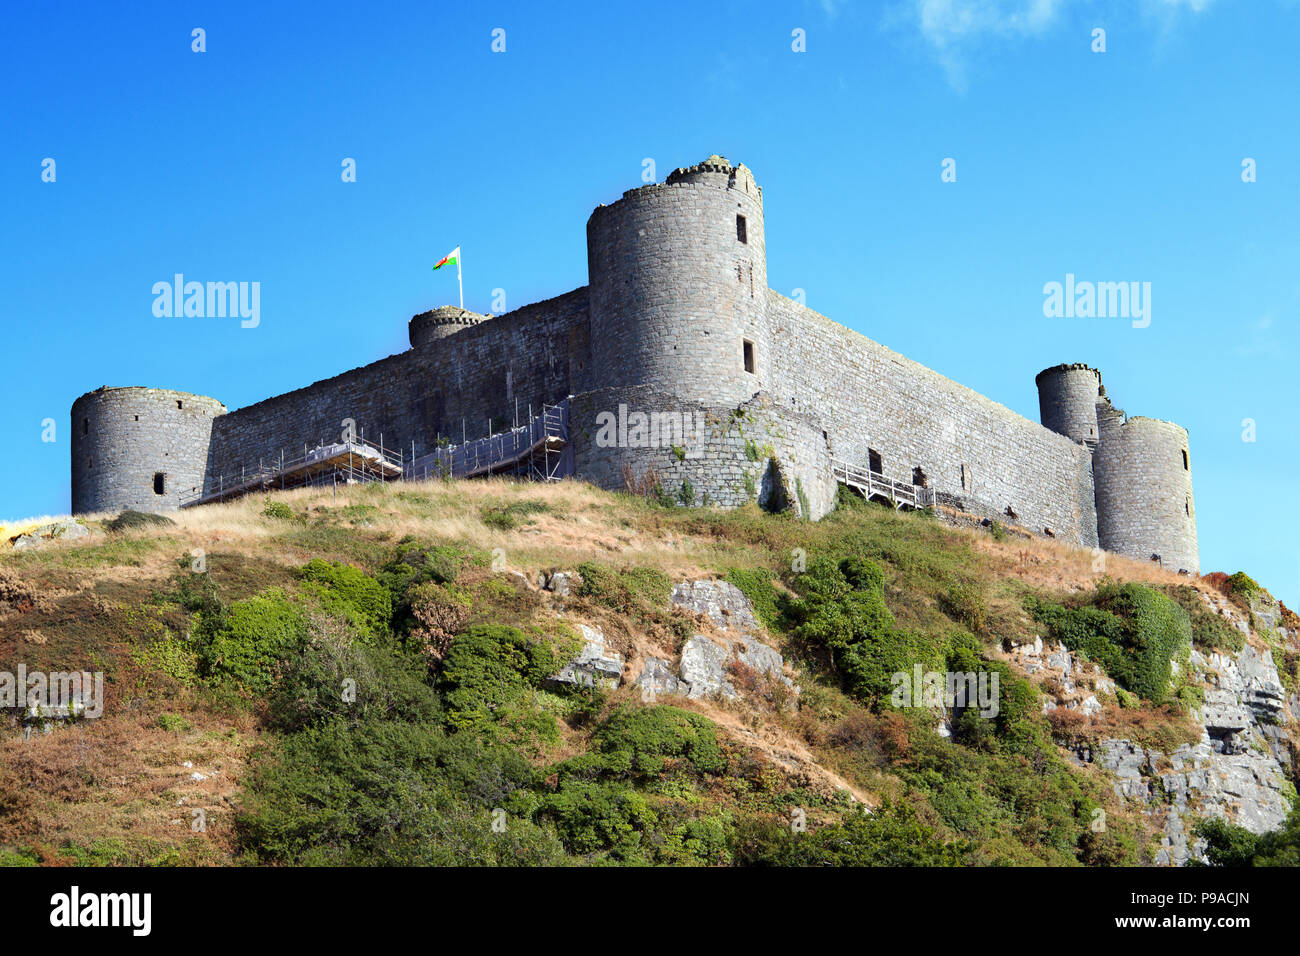 Harlech Castle in Harlech, Wales, is a medieval fortification built by Edward I during his invasion of Wales between 1282 and 1289. Stock Photo